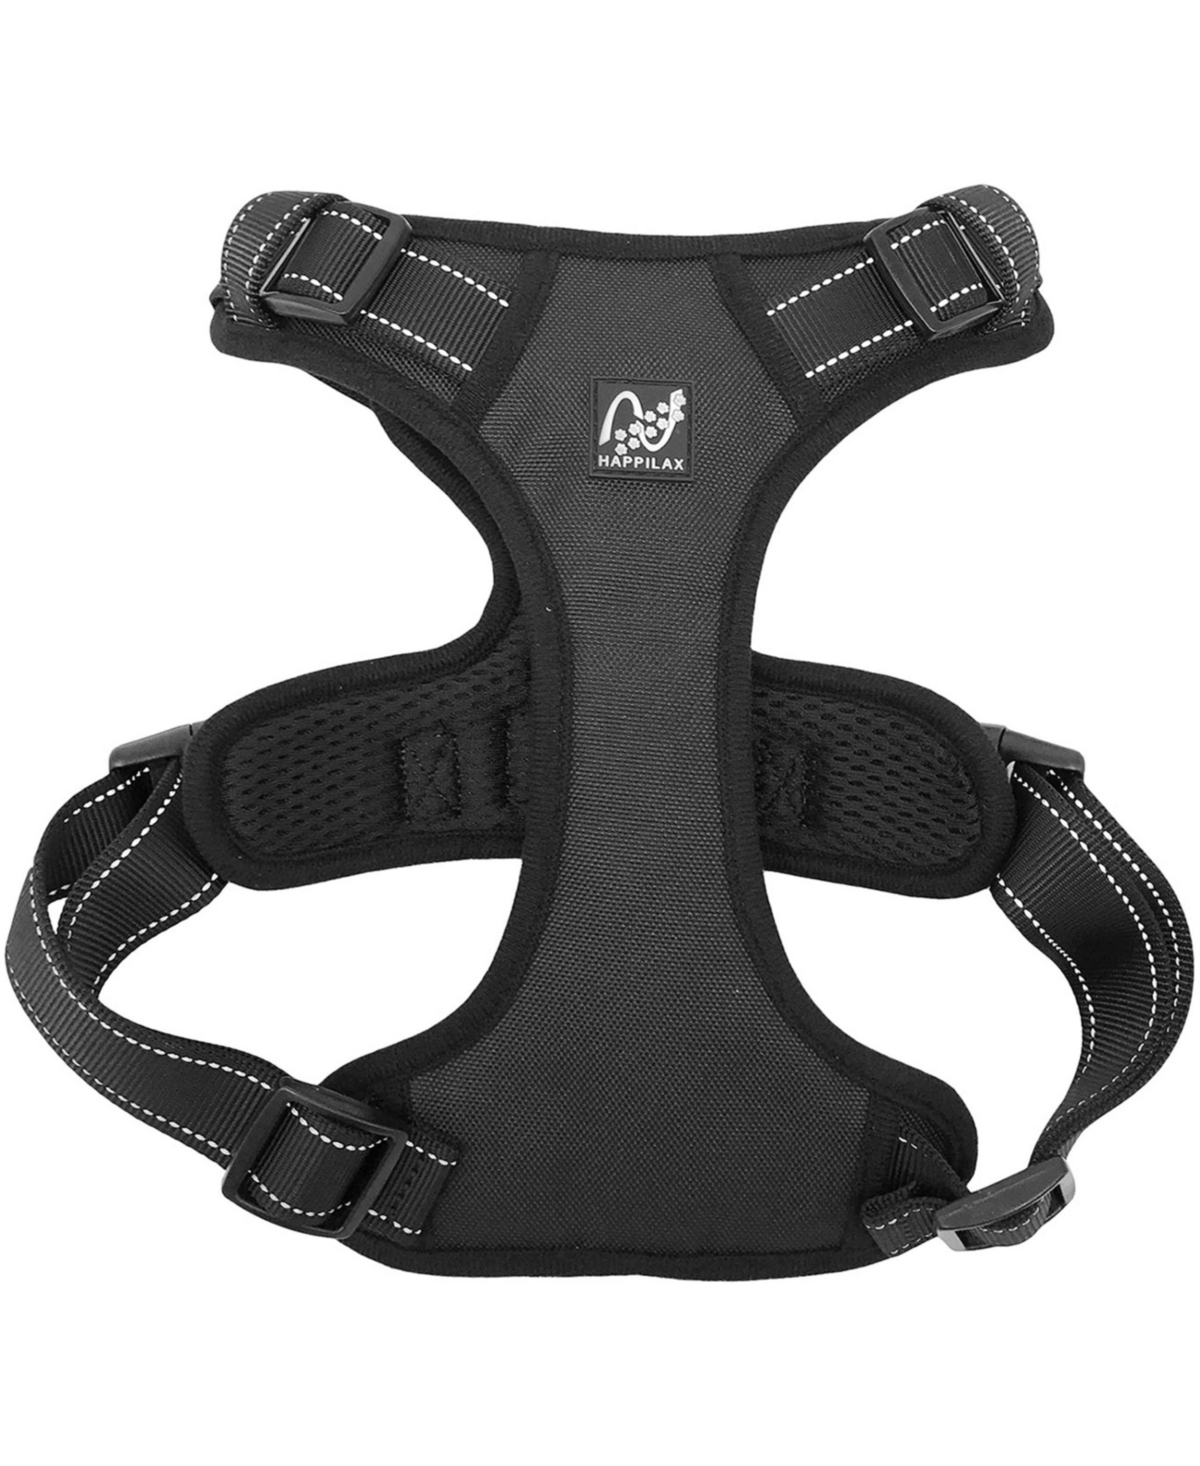 Adjustable Padded and Reflective Safety Harness for Dogs - Black